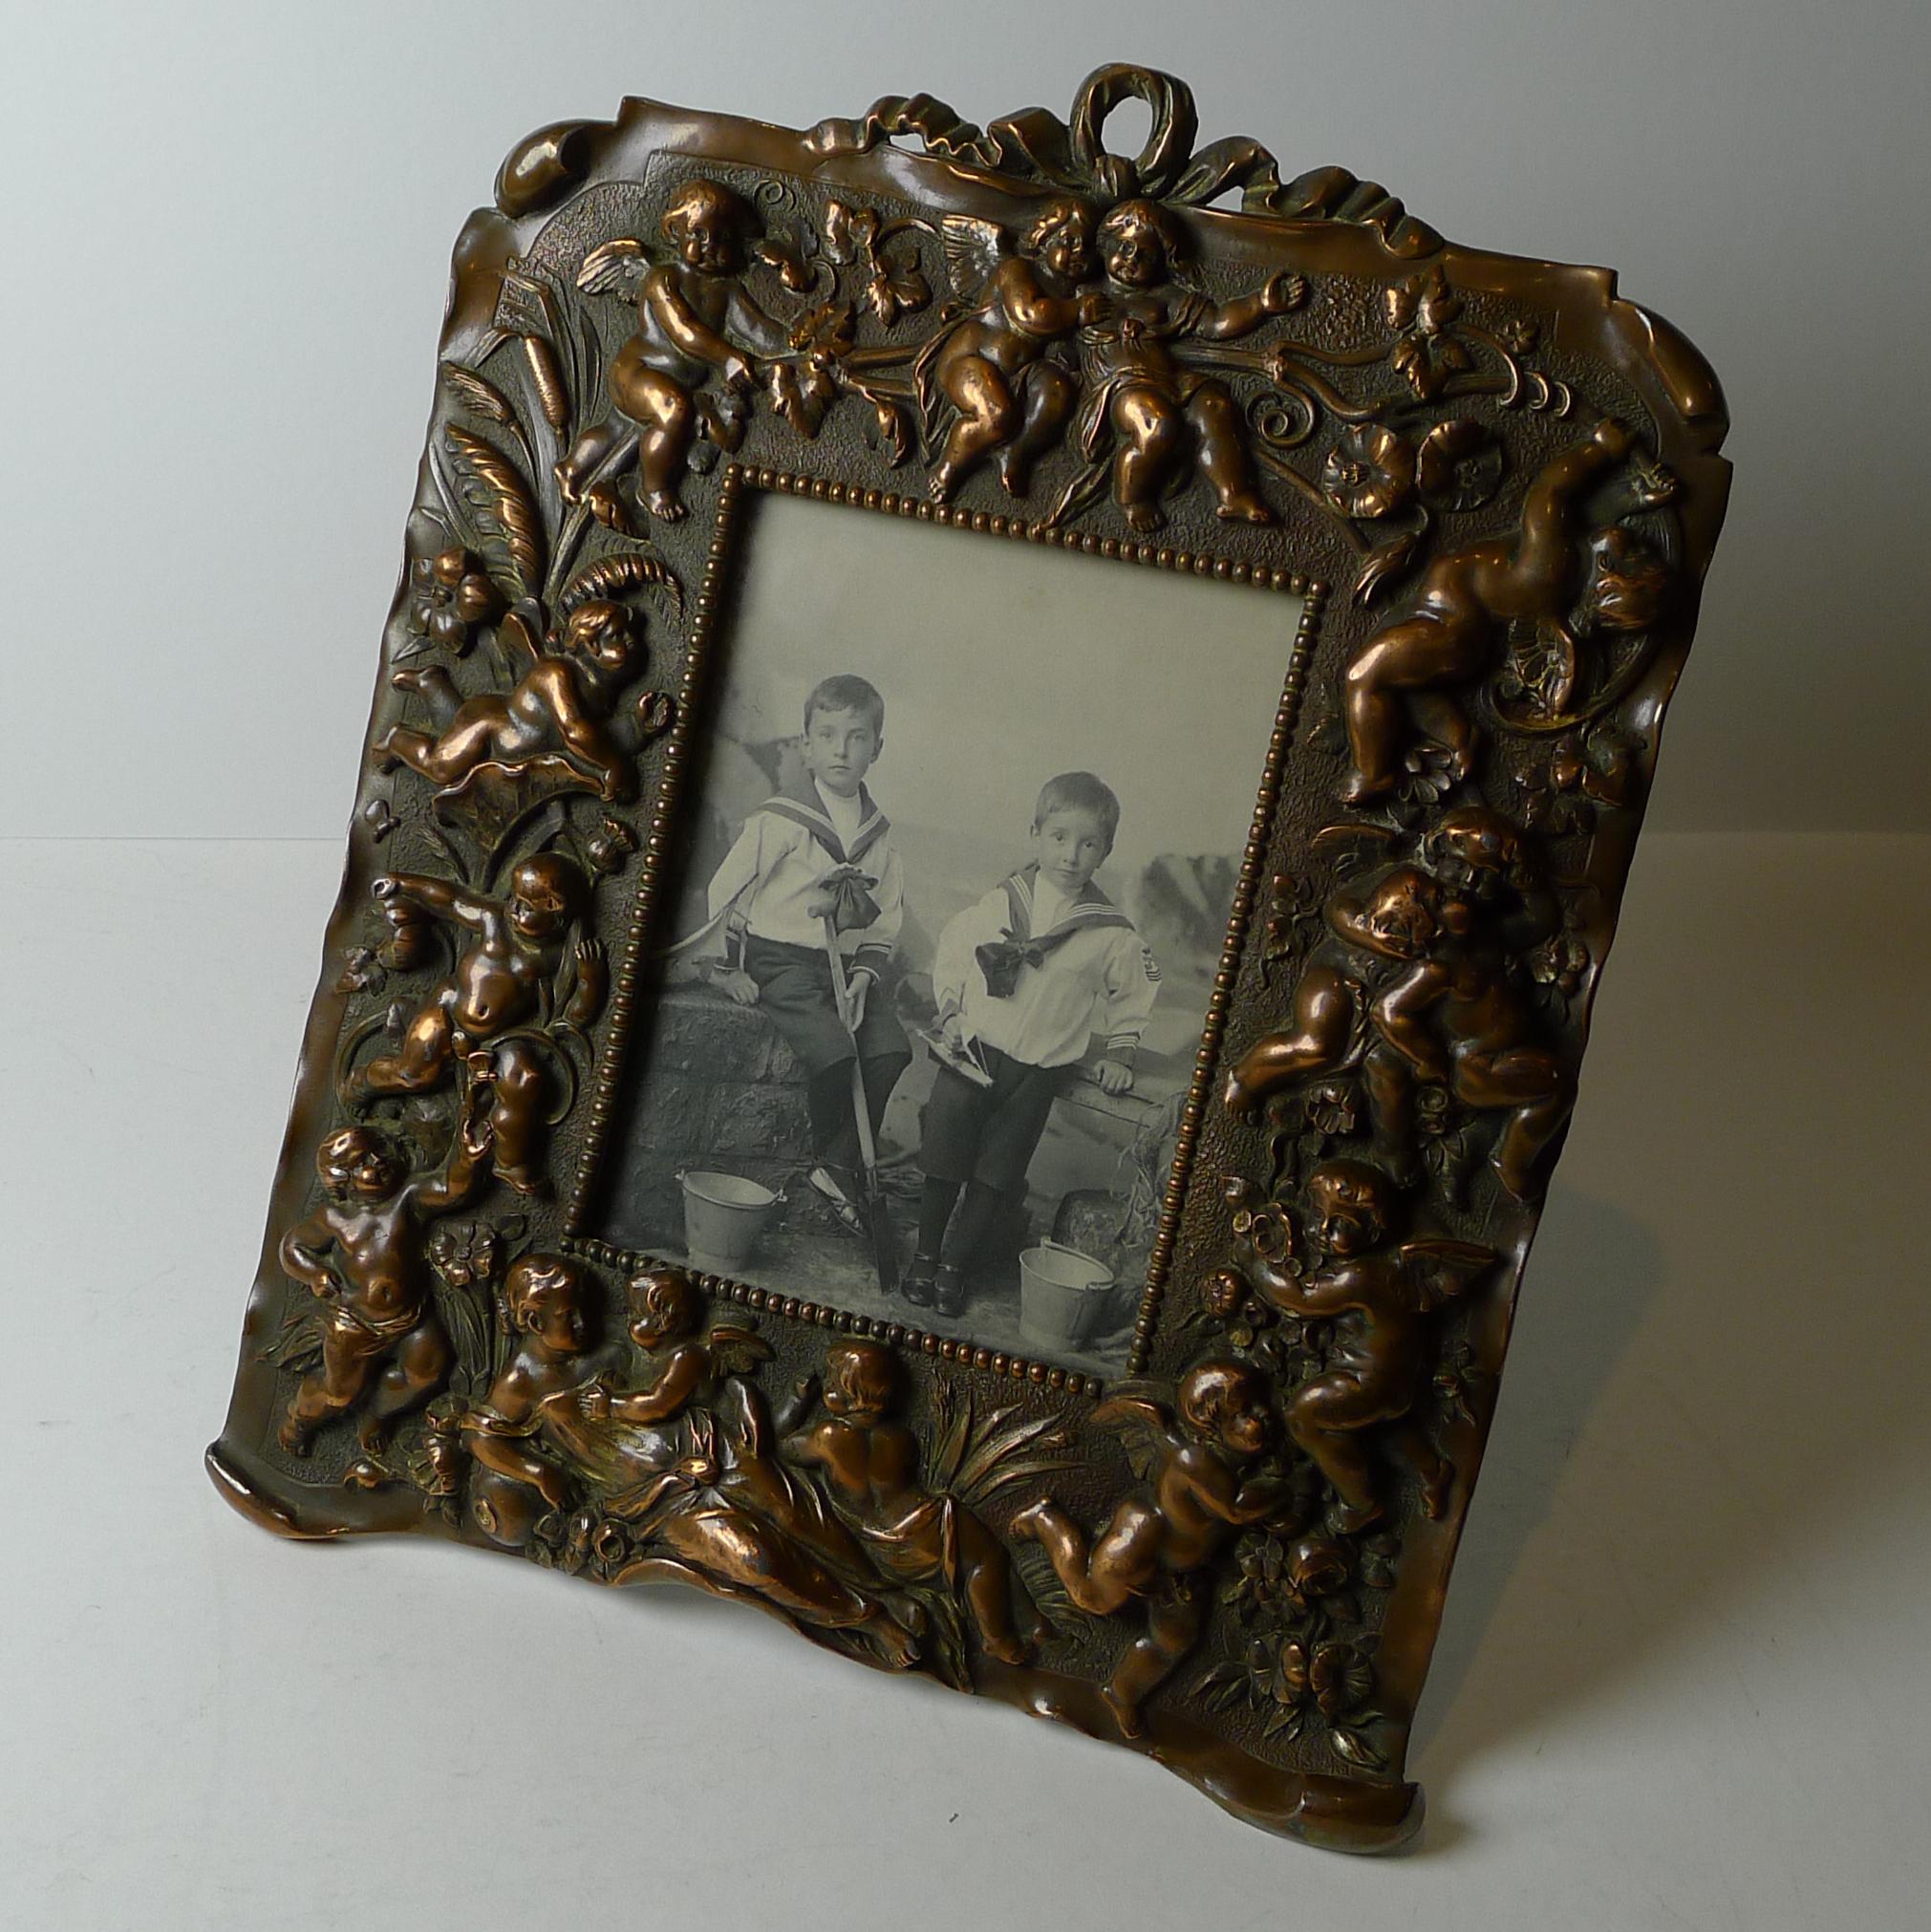 An outstanding antique French photograph frame made from cast mixed metals with the most amazing collection of cherubs gracing the front amongst a plethora of flora and foliate decoration, all finished with a combination of copper plate, brass and